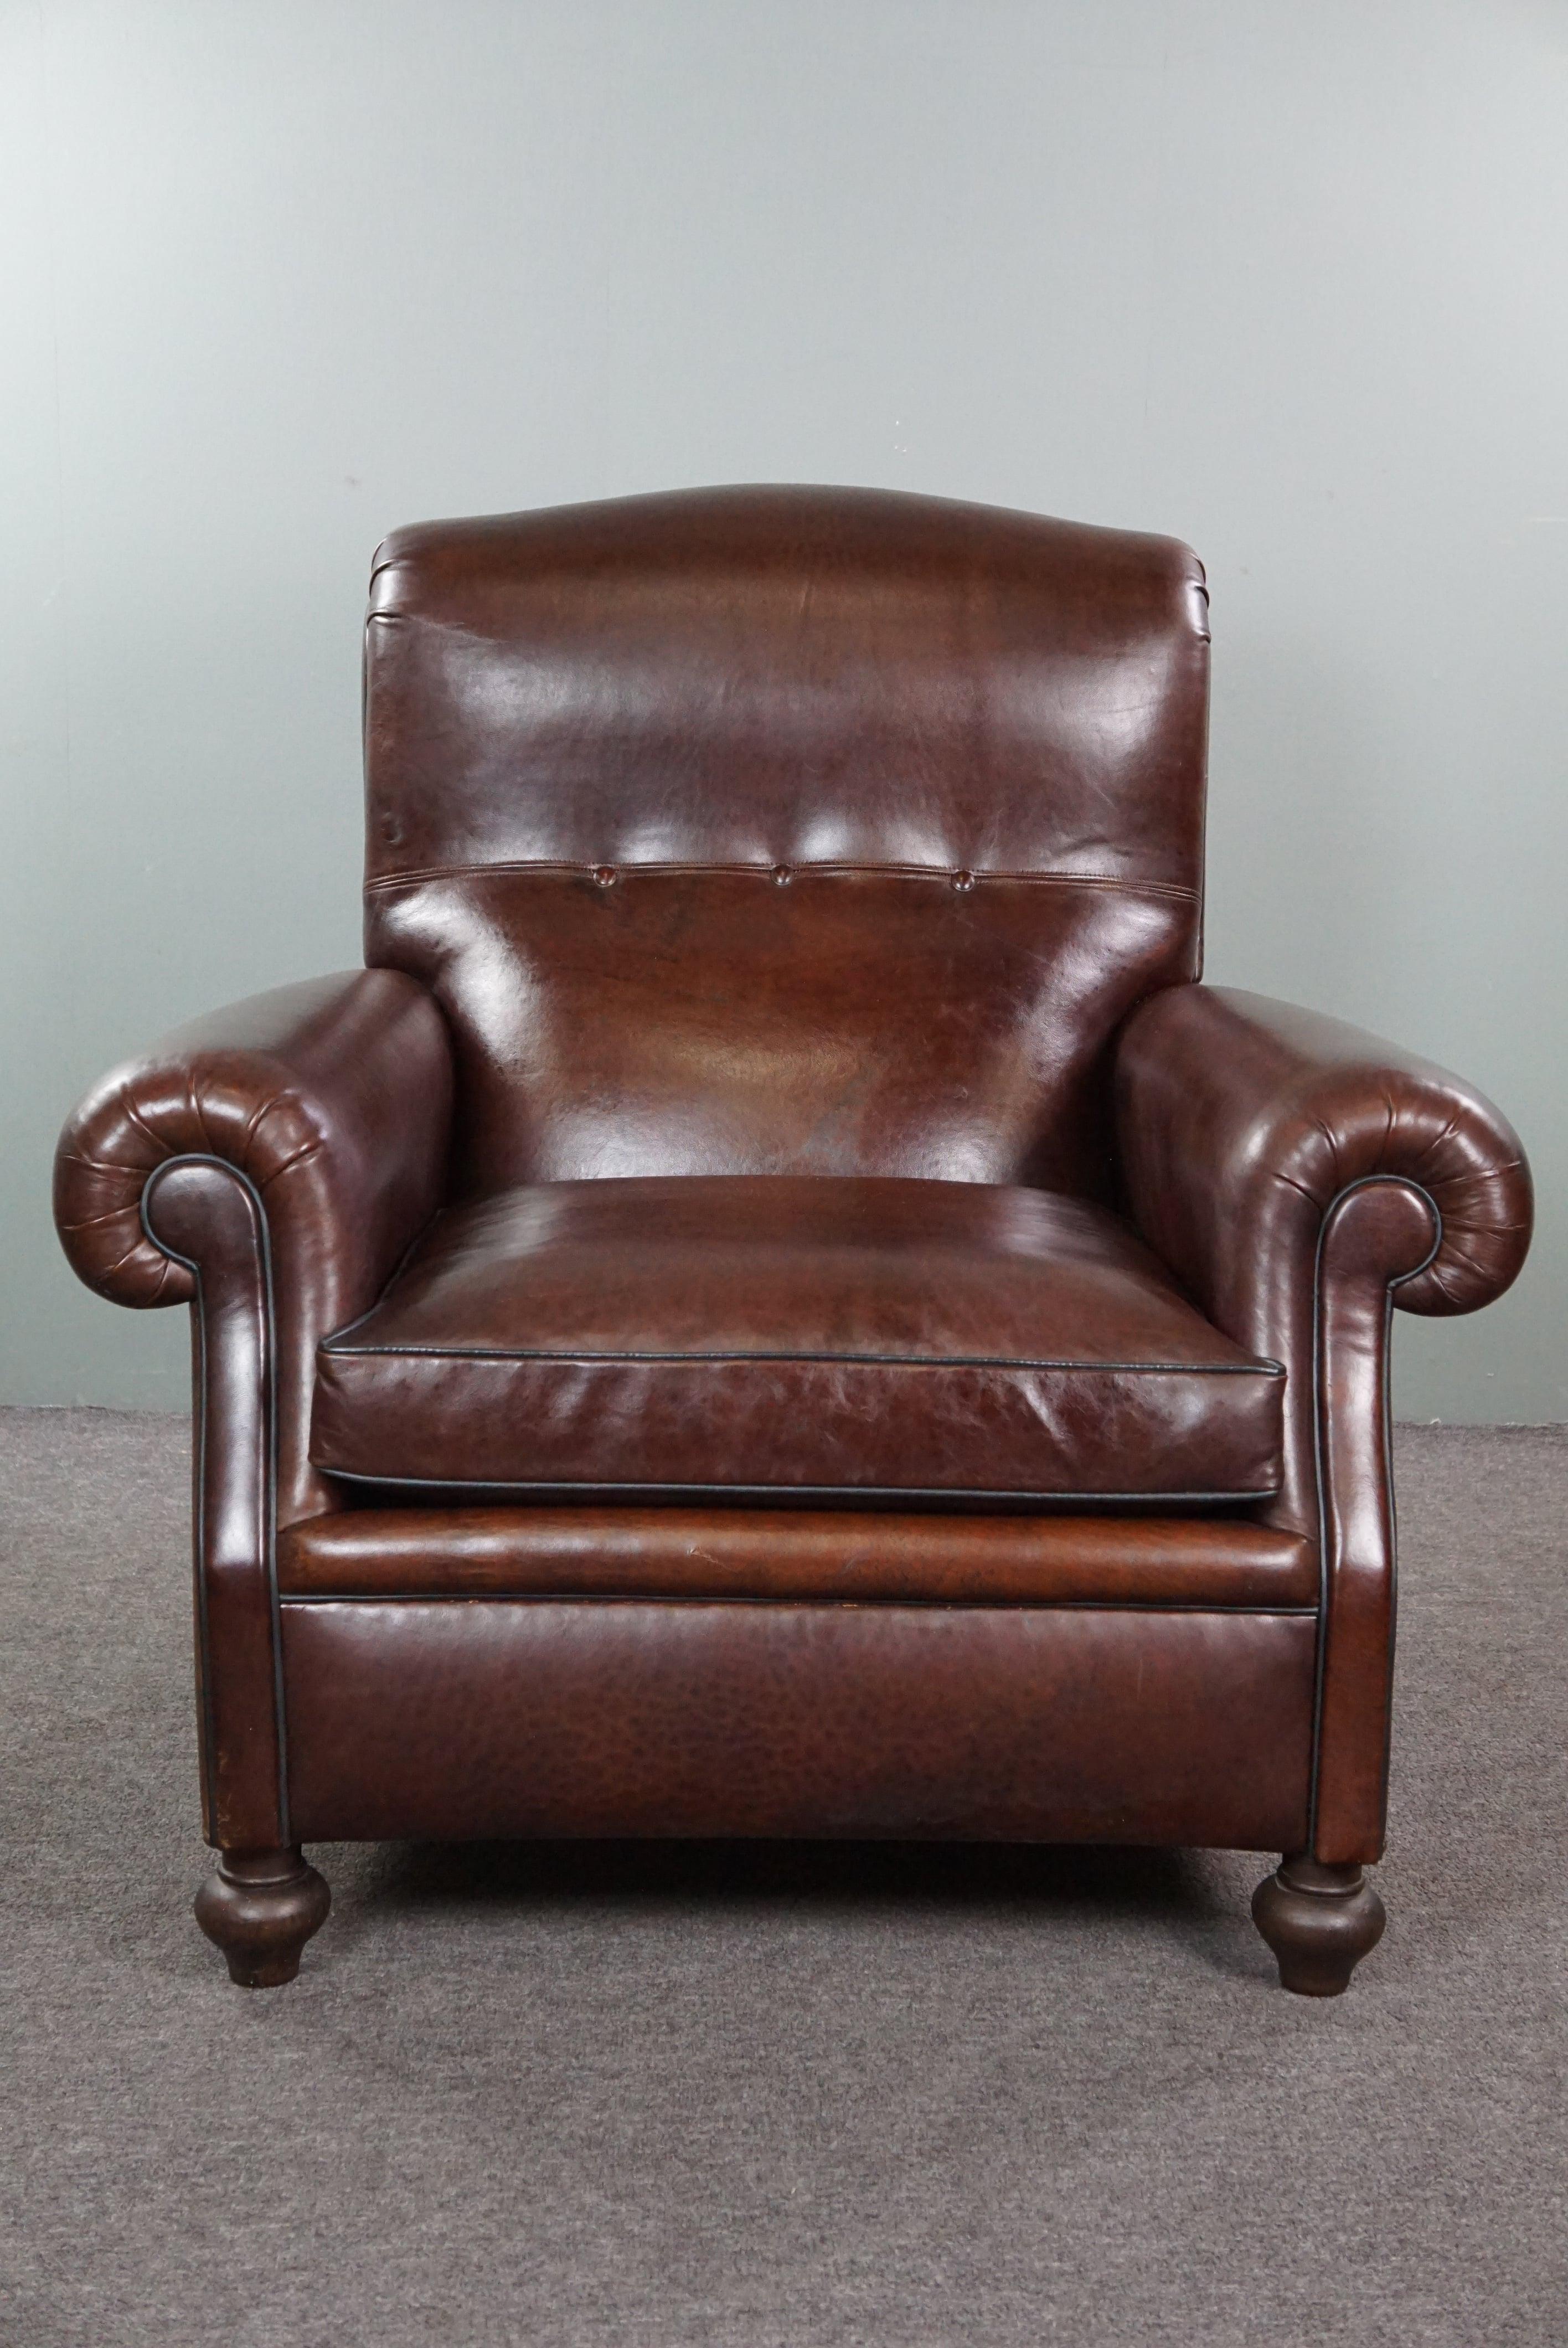 Offered is this beautiful old English armchair that has been recently reupholstered with lovely dark-colored sheep leather. For those seeking a stunning and comfortable English armchair to elevate any room of their choice to an even higher level,